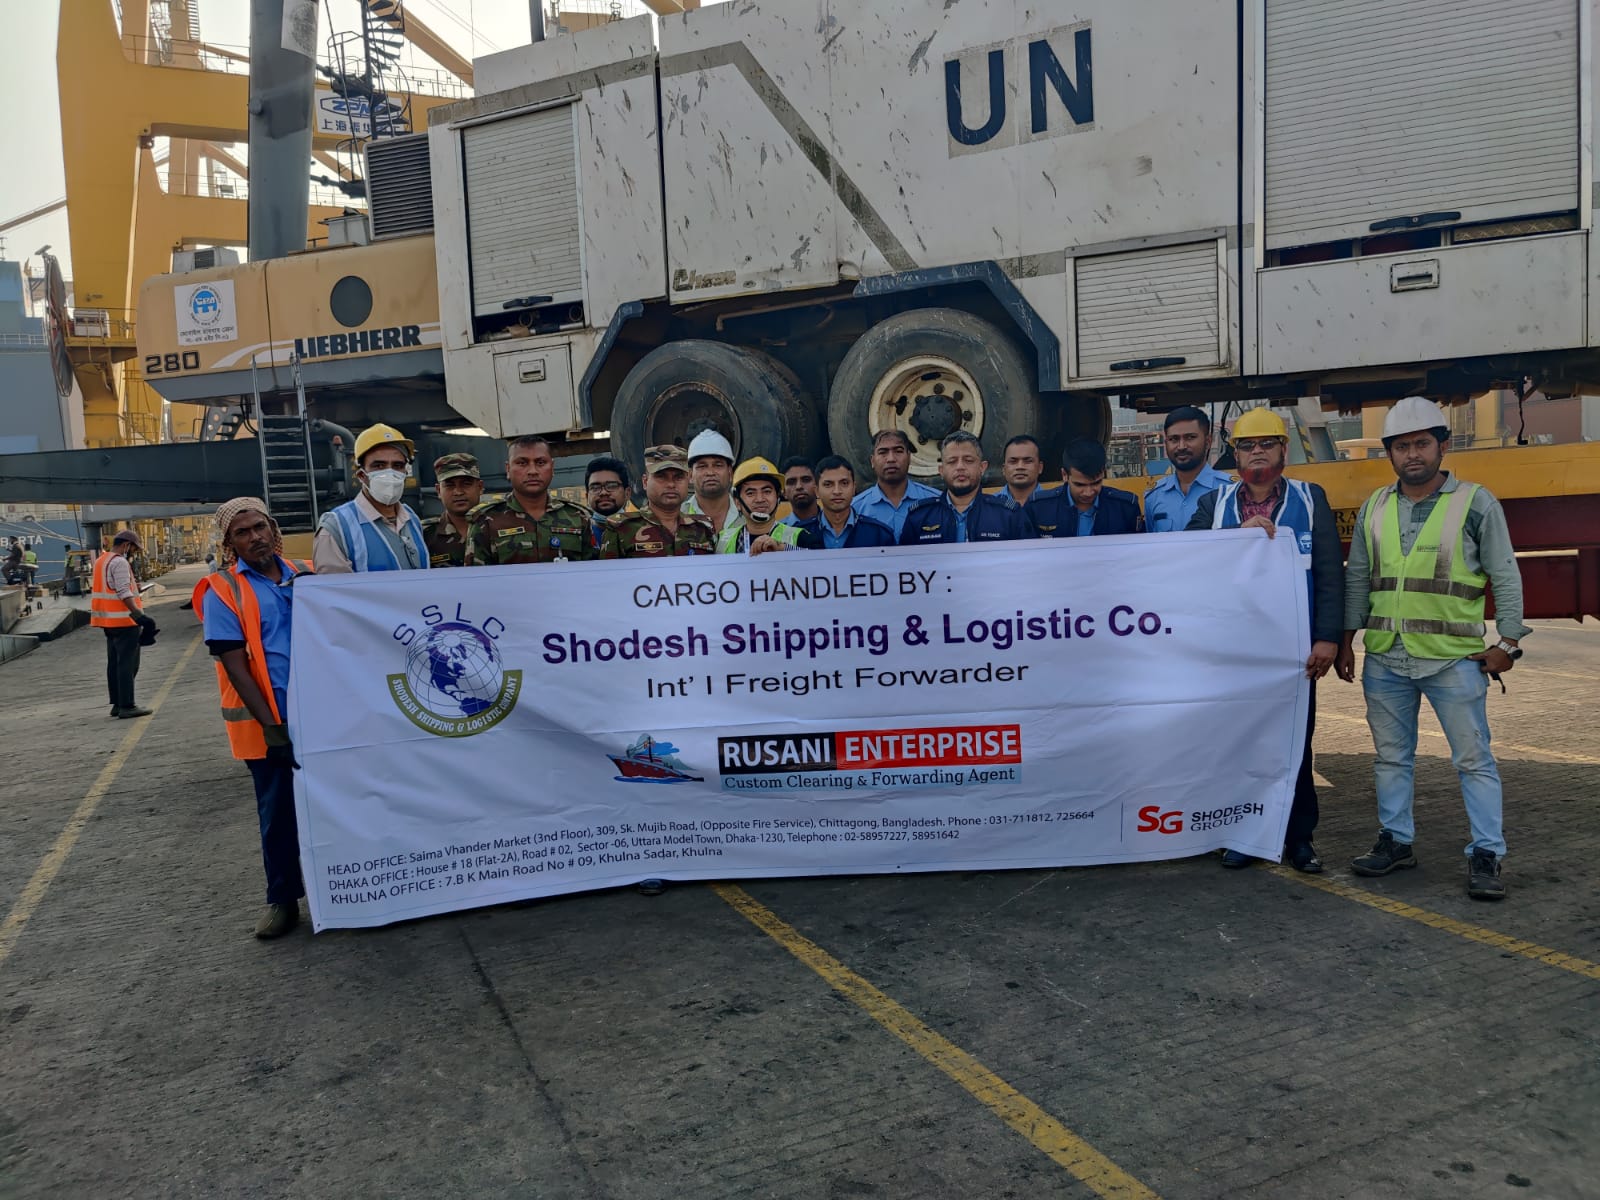 Shodesh Shipping - Vessel and cargo handling for United Nations | The ...